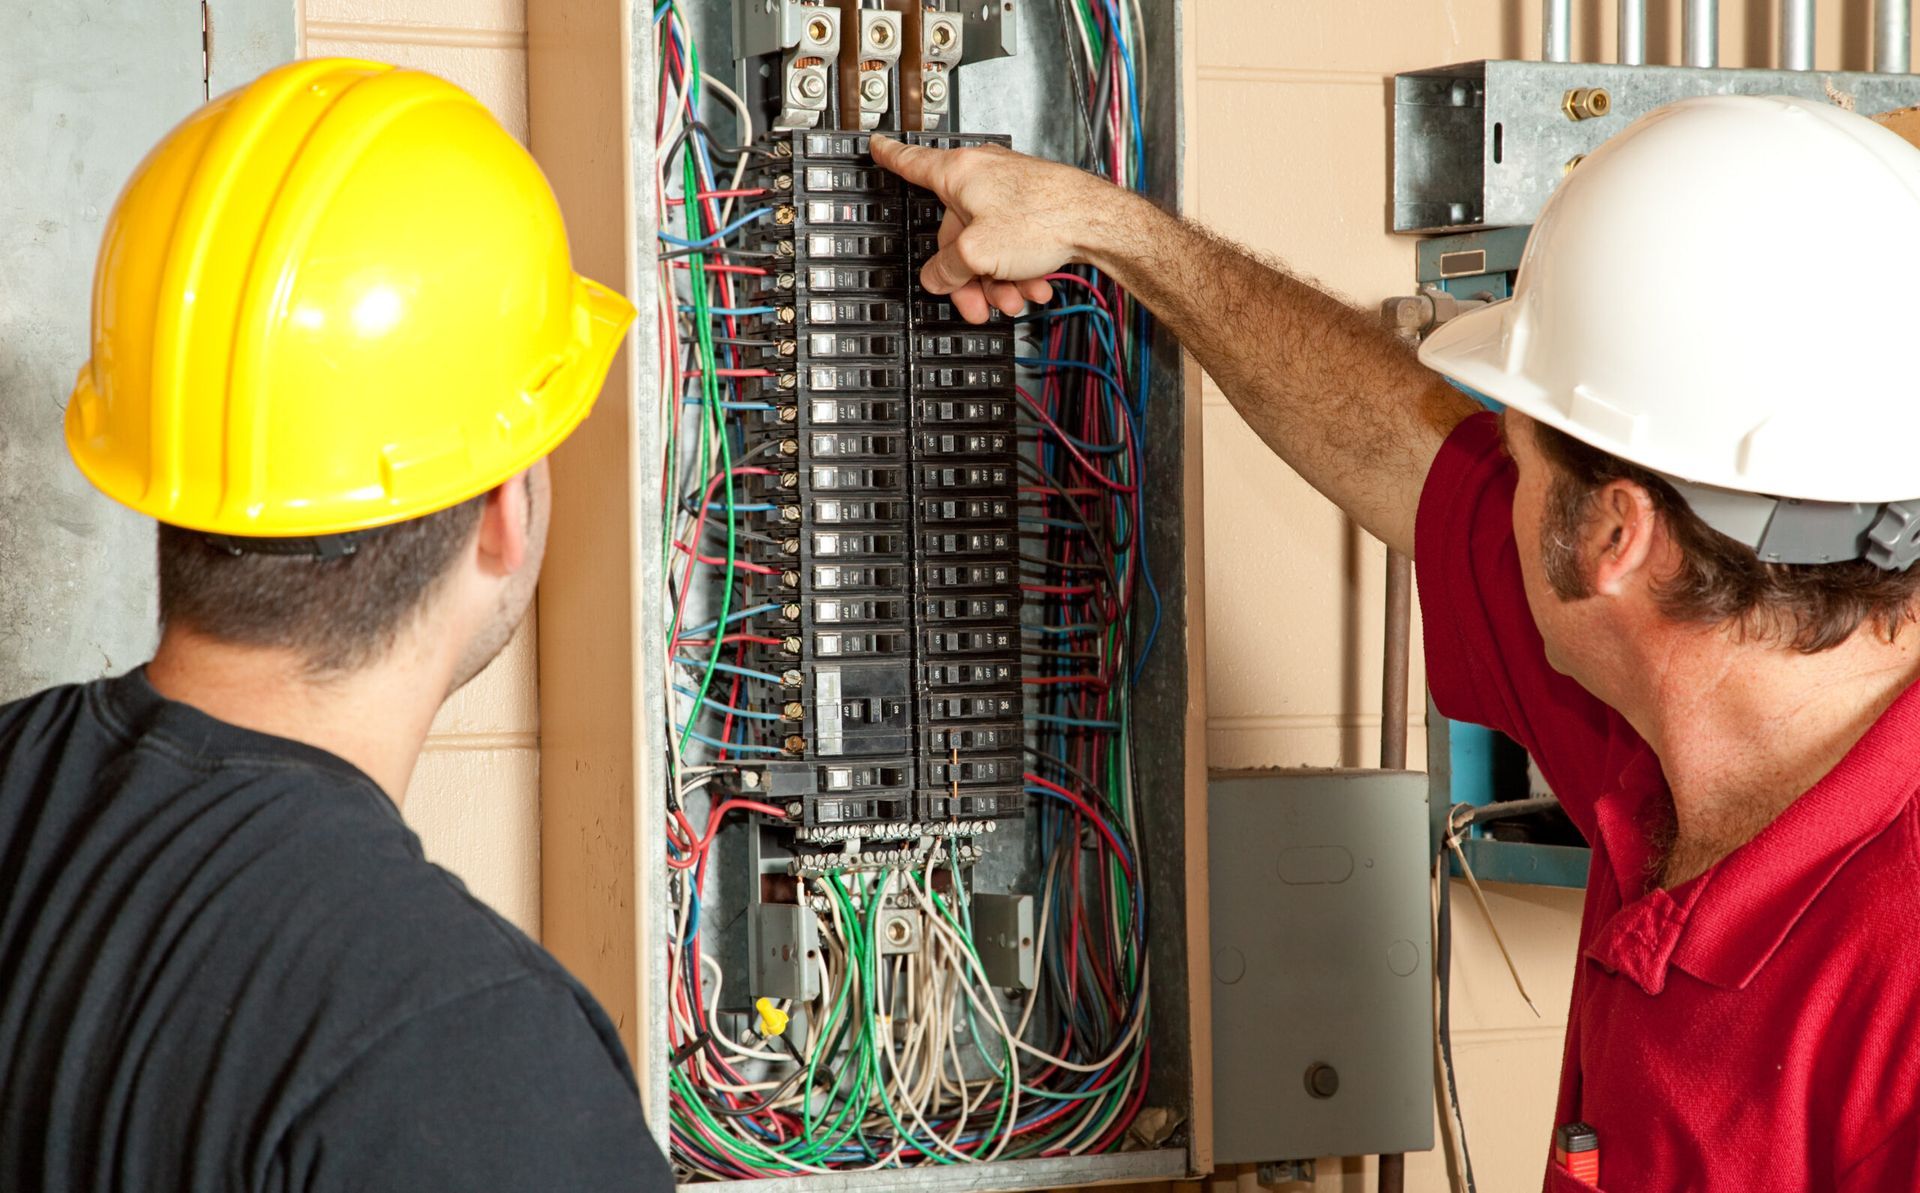 Two men wearing hard hats are working on an electrical panel.